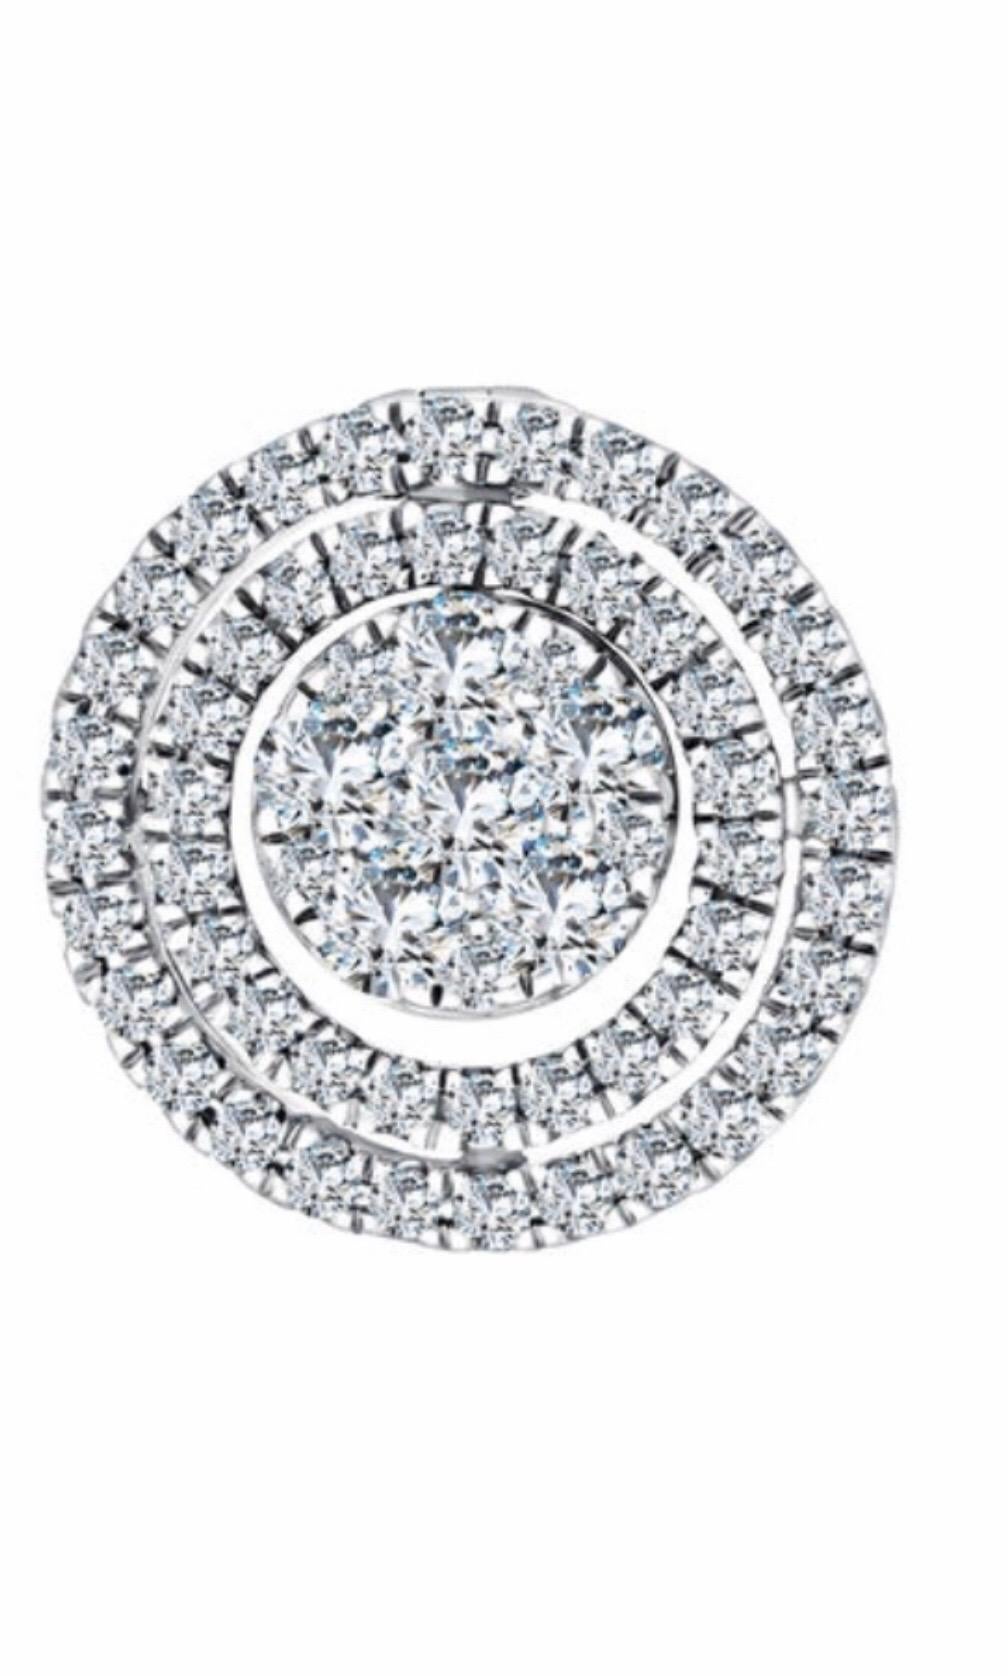 Versatile micro set 18k white gold earrings with 3 rows of concentric circles all intricately laced in 1.00ct round brilliant H-SI diamonds. These earrings can be used as studs or as drop earrings, 3 different looks. The weight of these earrings are